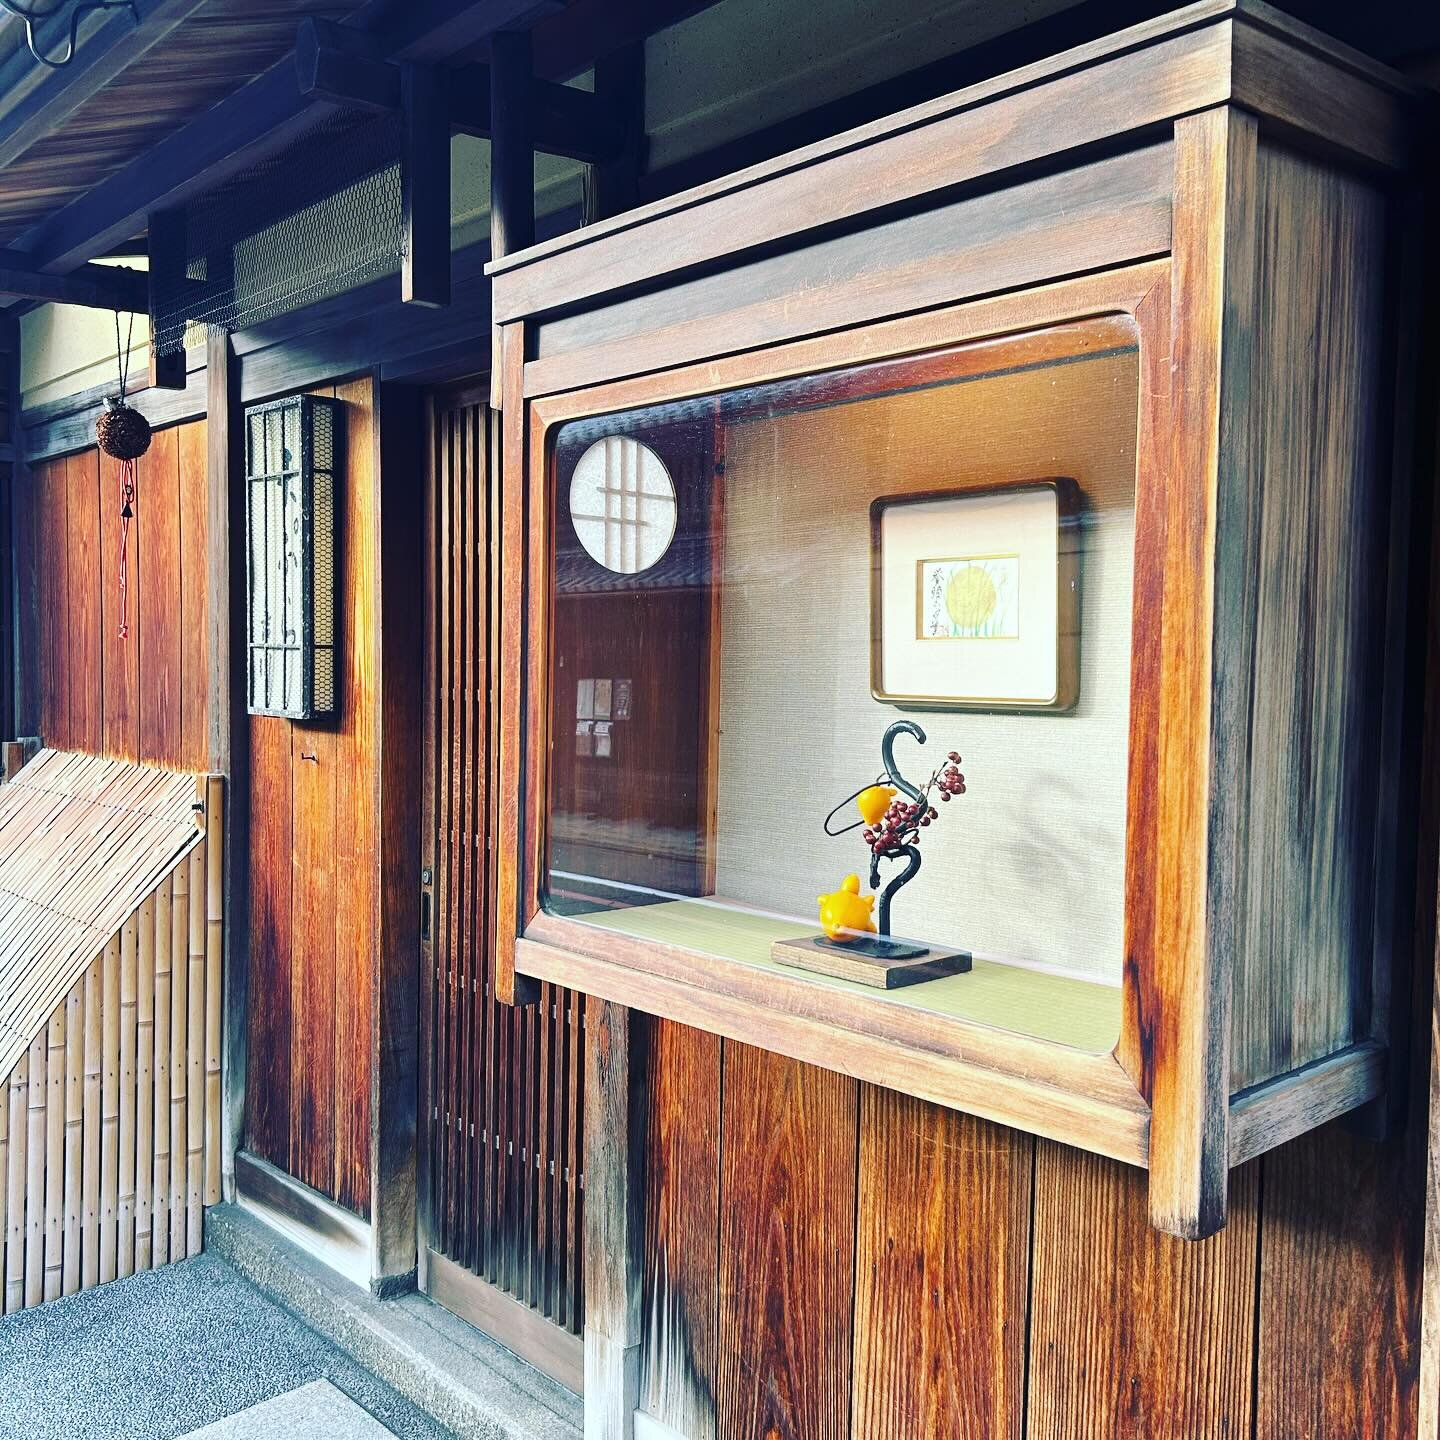 Display Cases of Kyoto